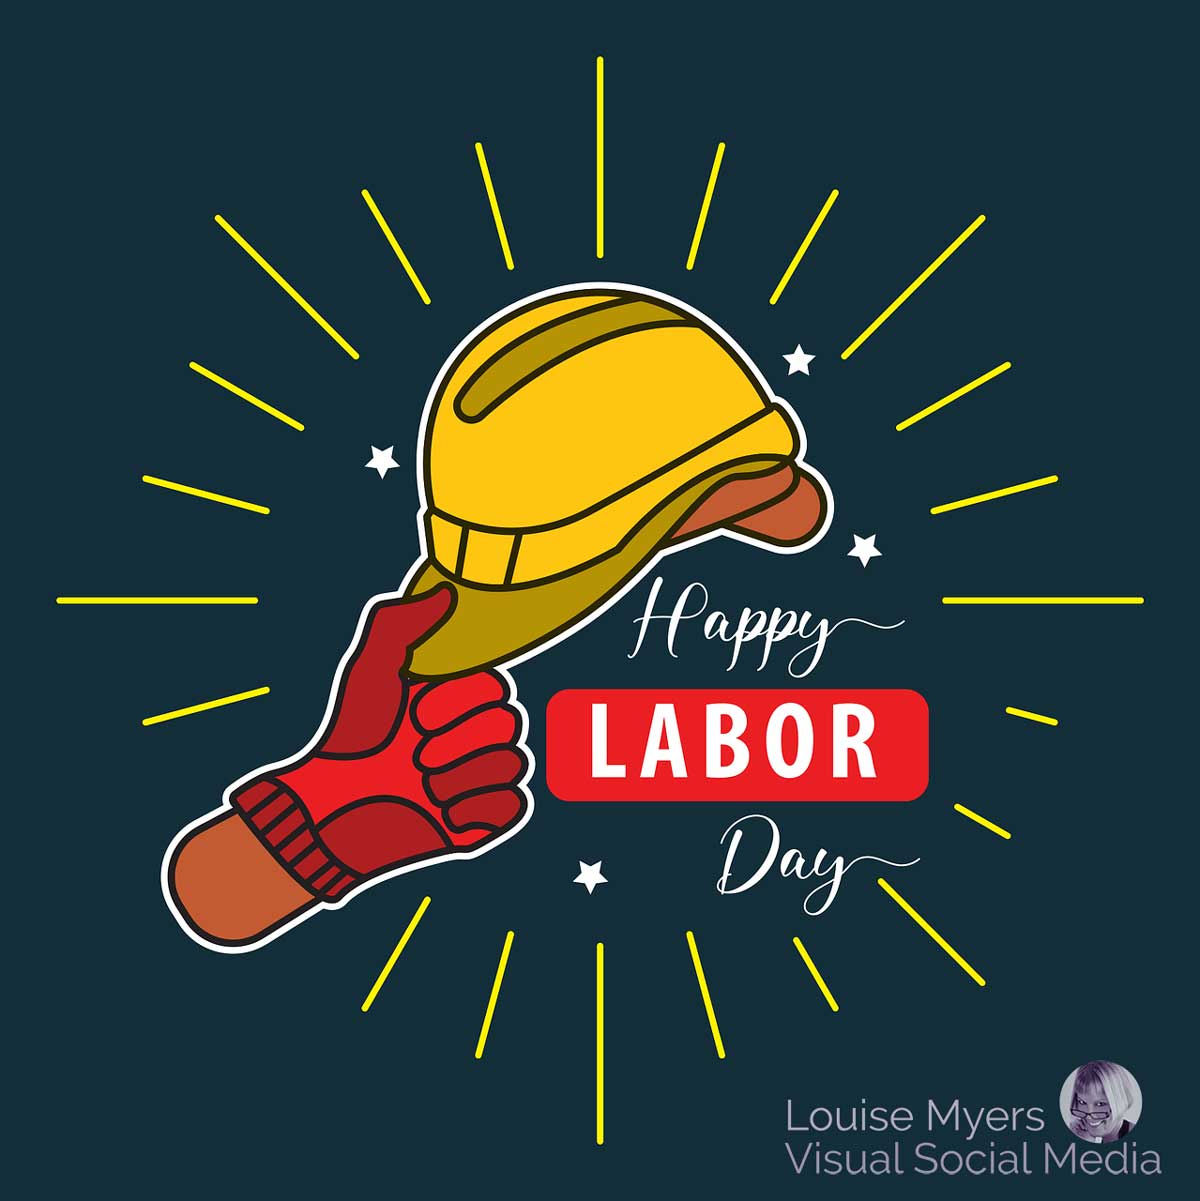 drawing of construction worker hat and glove says happy labor day.